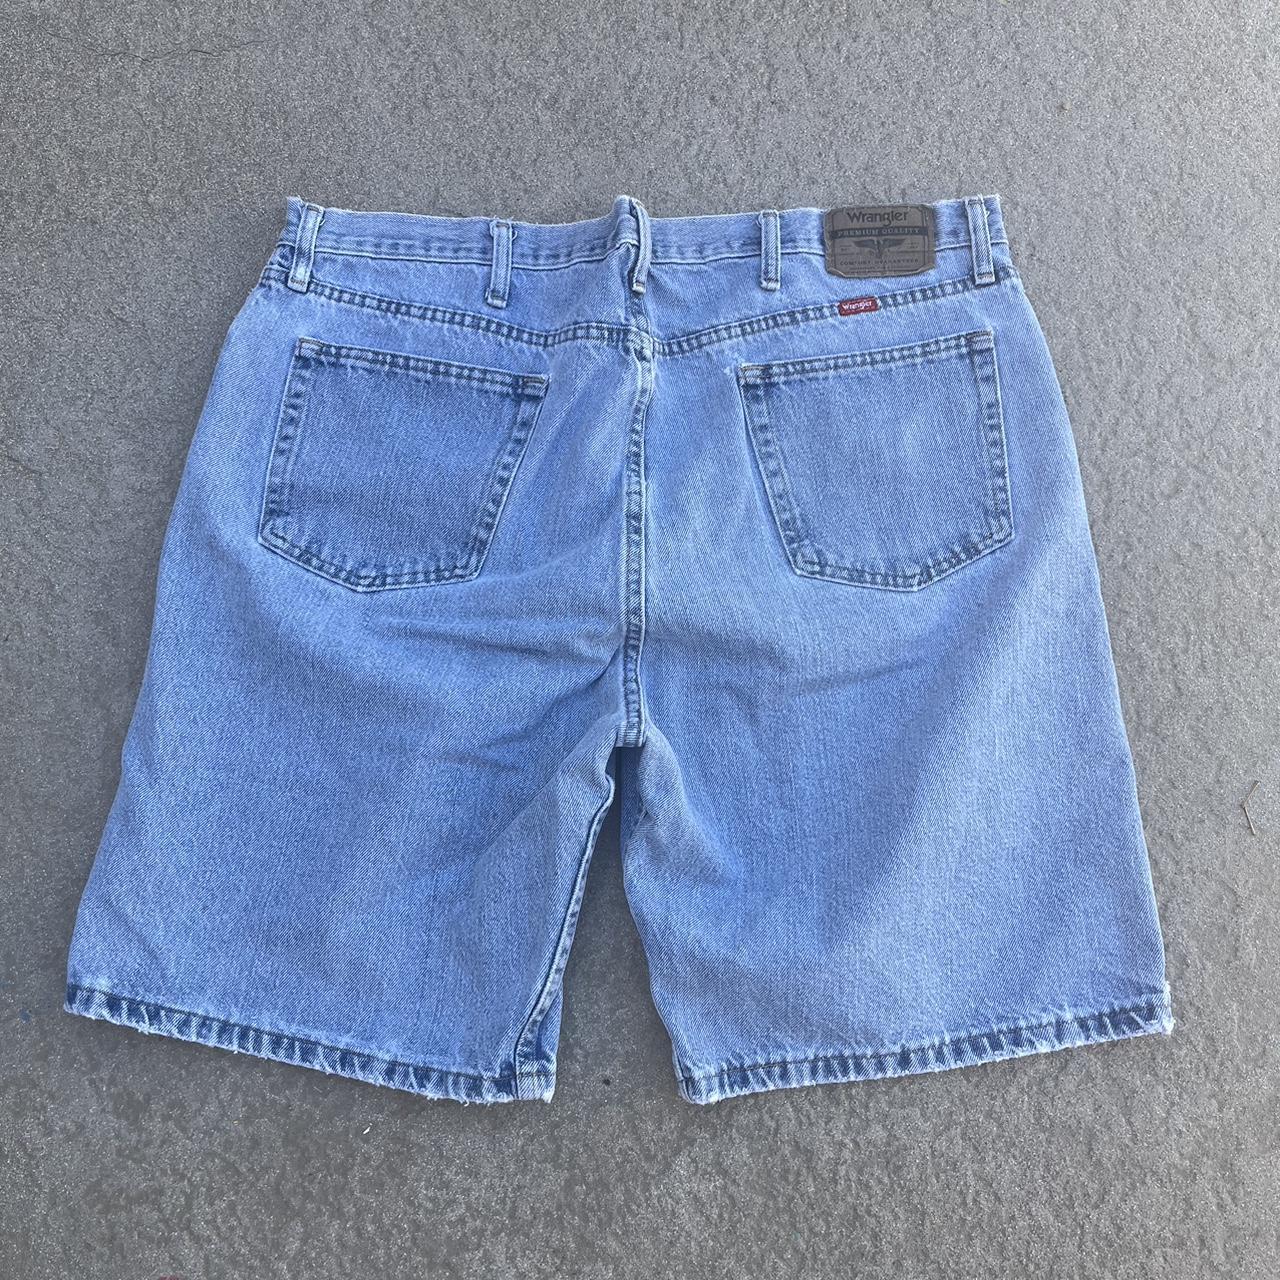 Vintage wrangler Jorts amazing look and fade to... - Depop